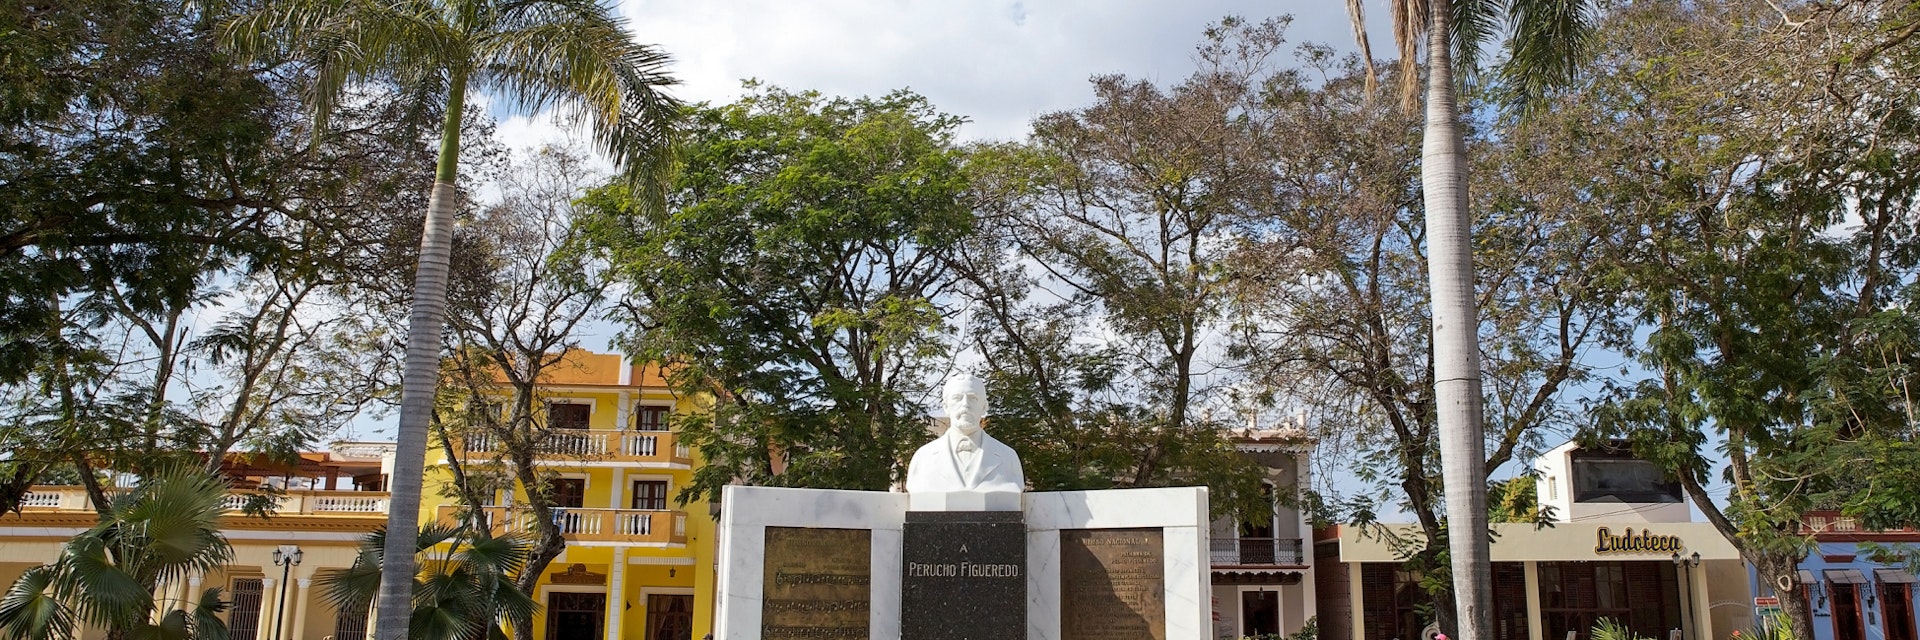 Statue of Perucho Figueredo at the Cespedes Park at the Bayamo, Cuba. Perucho Figueredo was a poet, musician and revolutionary in the 19th century. He wrote the cuban national anthem in 1867.